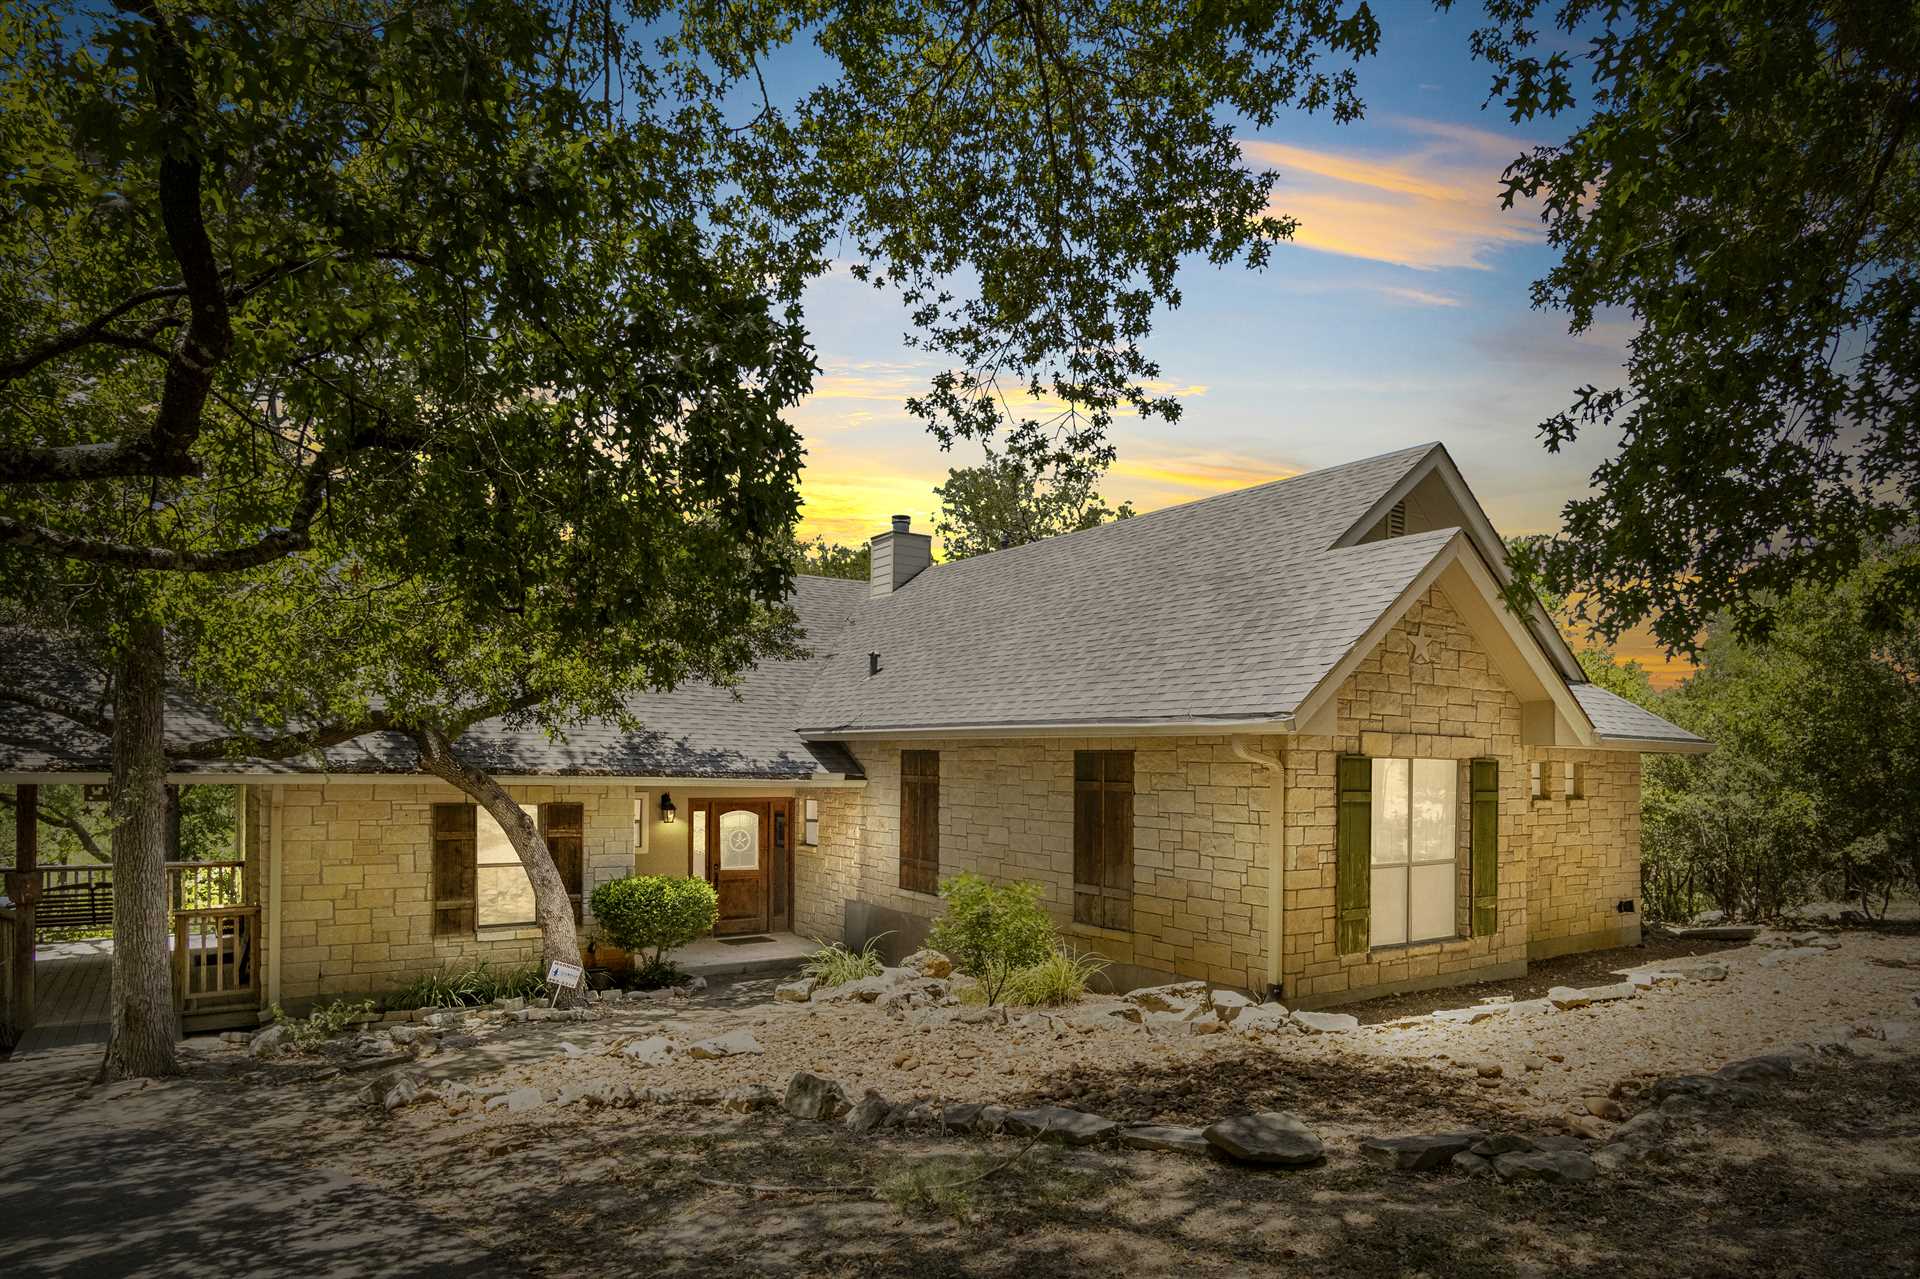                                                 The landscaping and construction of the Guadalupe River Retreat make it look right at home in its riverside setting.